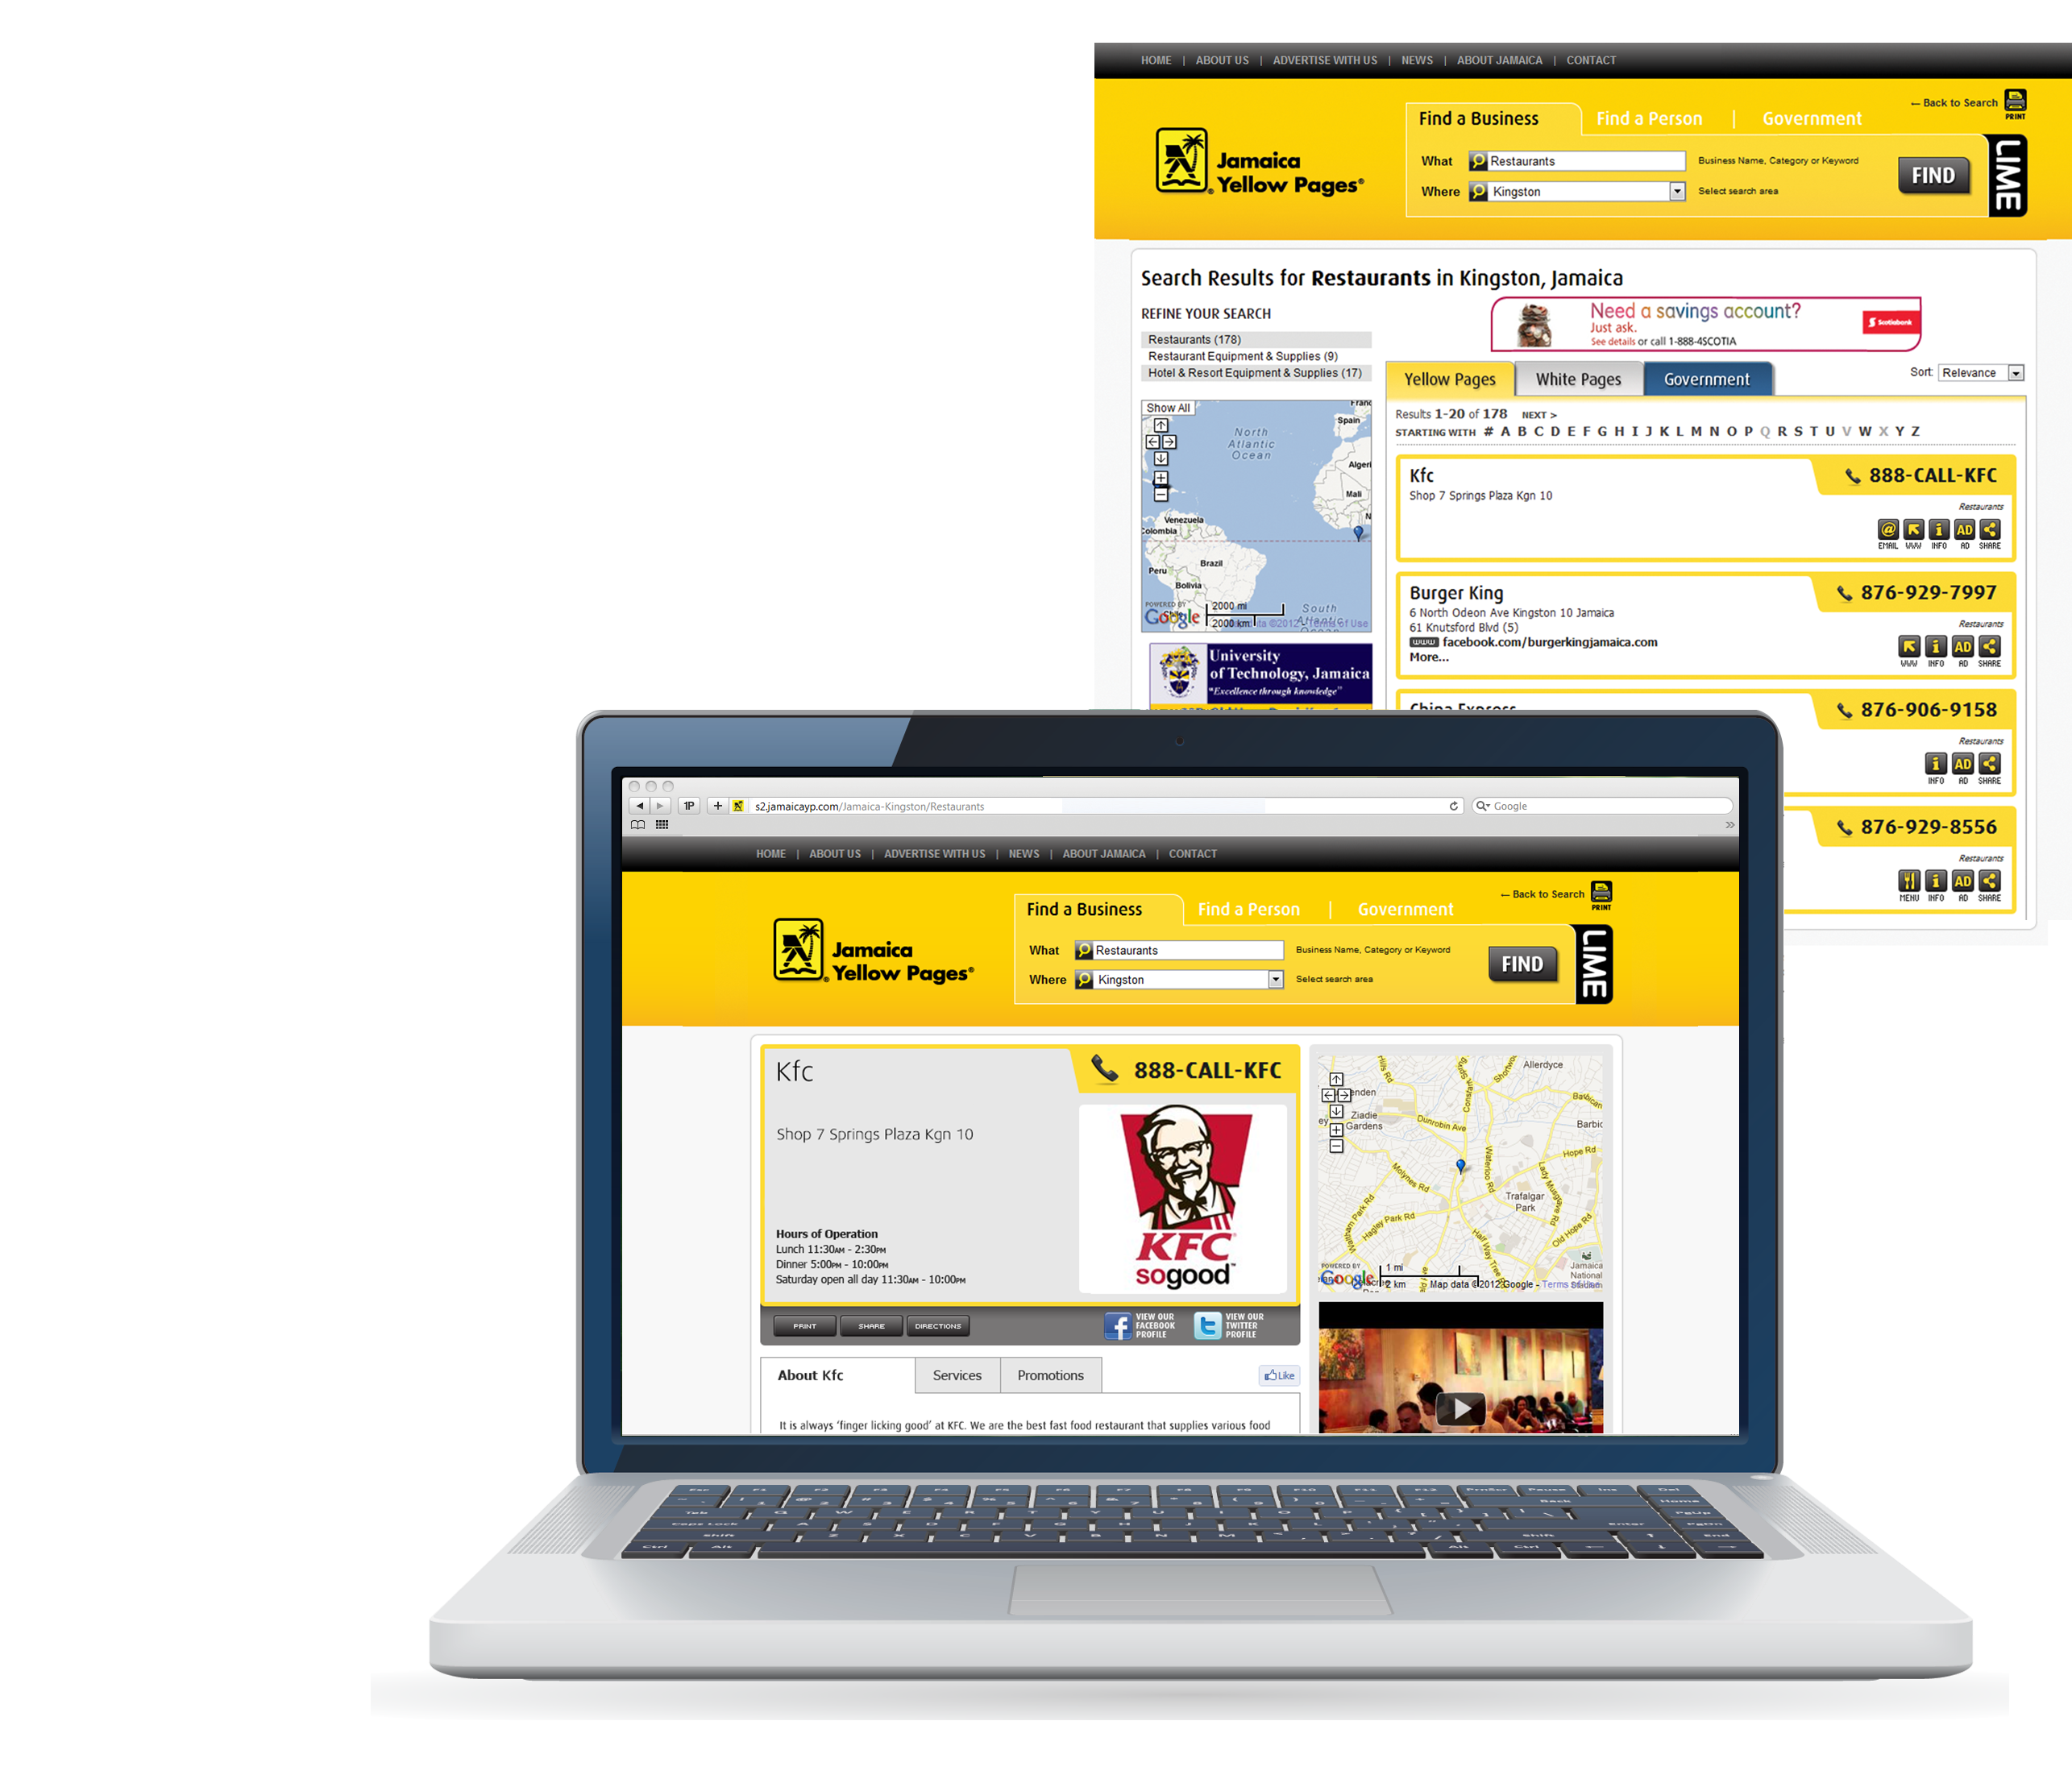 yellow pages data extractor